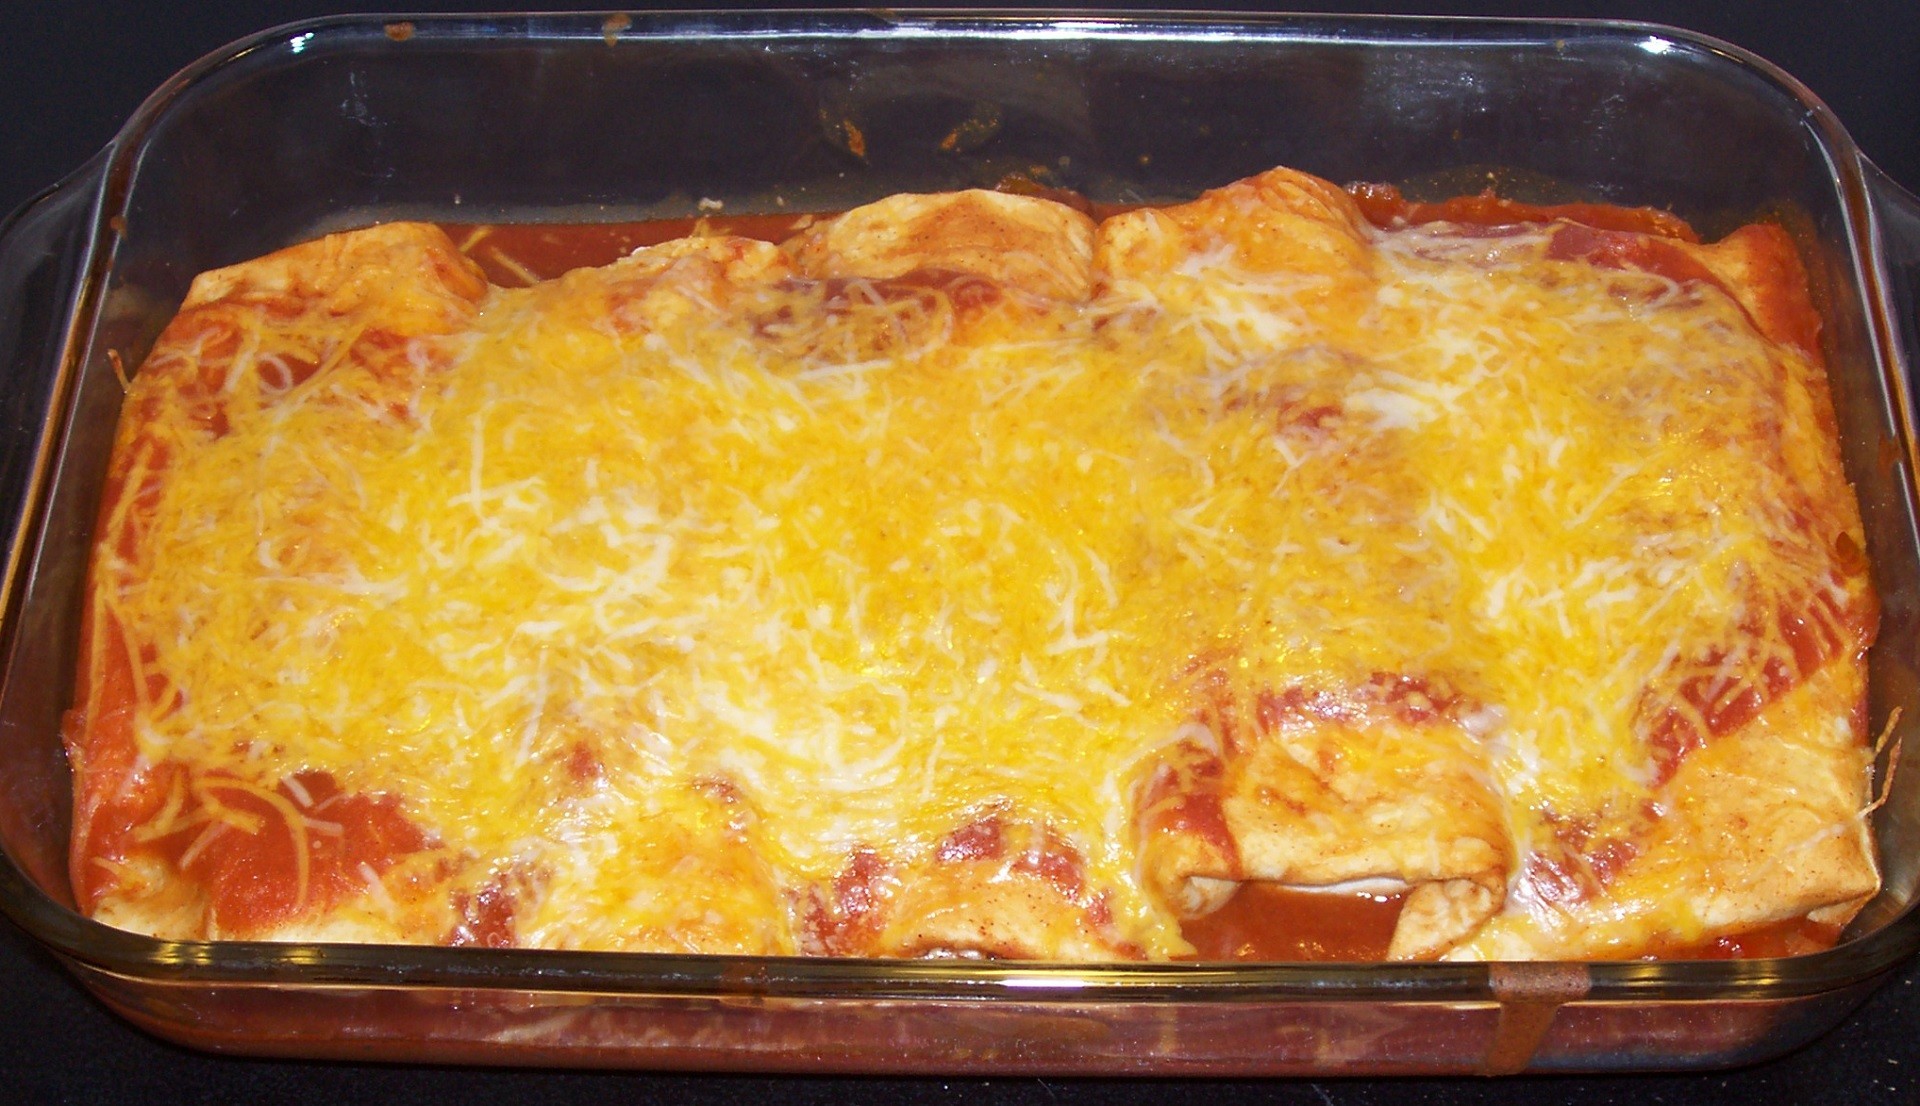 Chicken Enchiladas With Green and Red Sauce